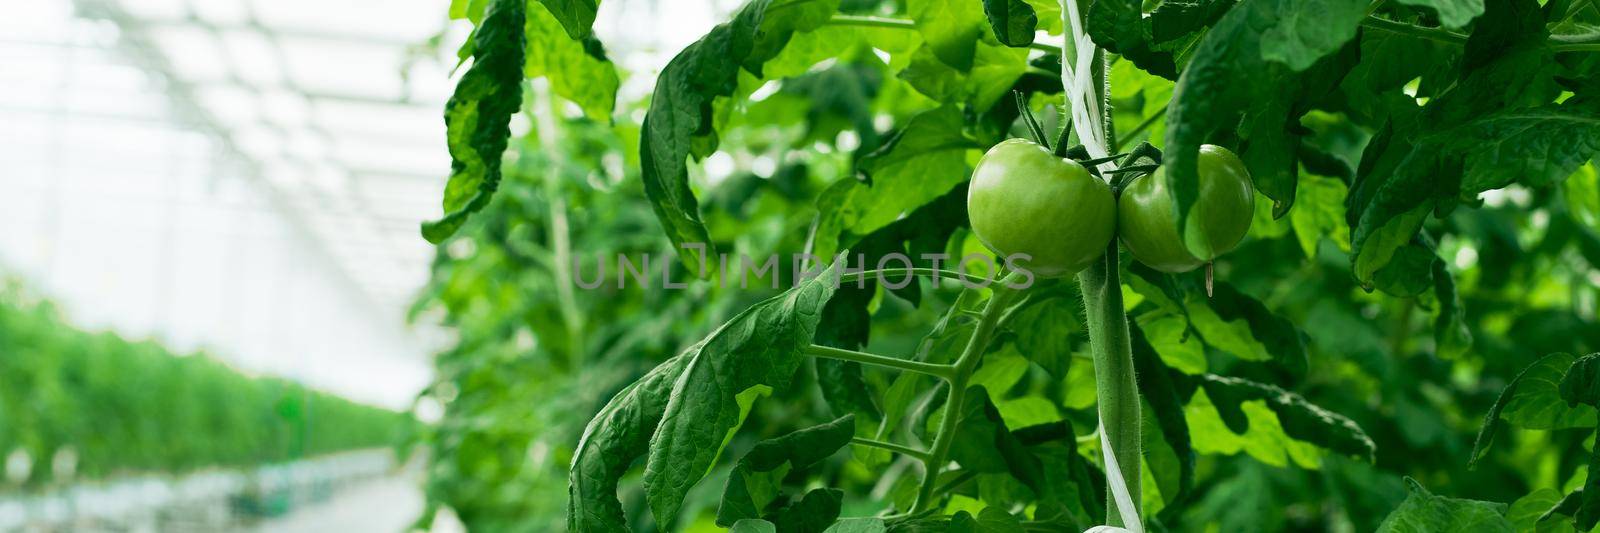 green tomatoes sprout in the greenhouse. Industrial cultivation of tomatoes and herbs. Web banner.